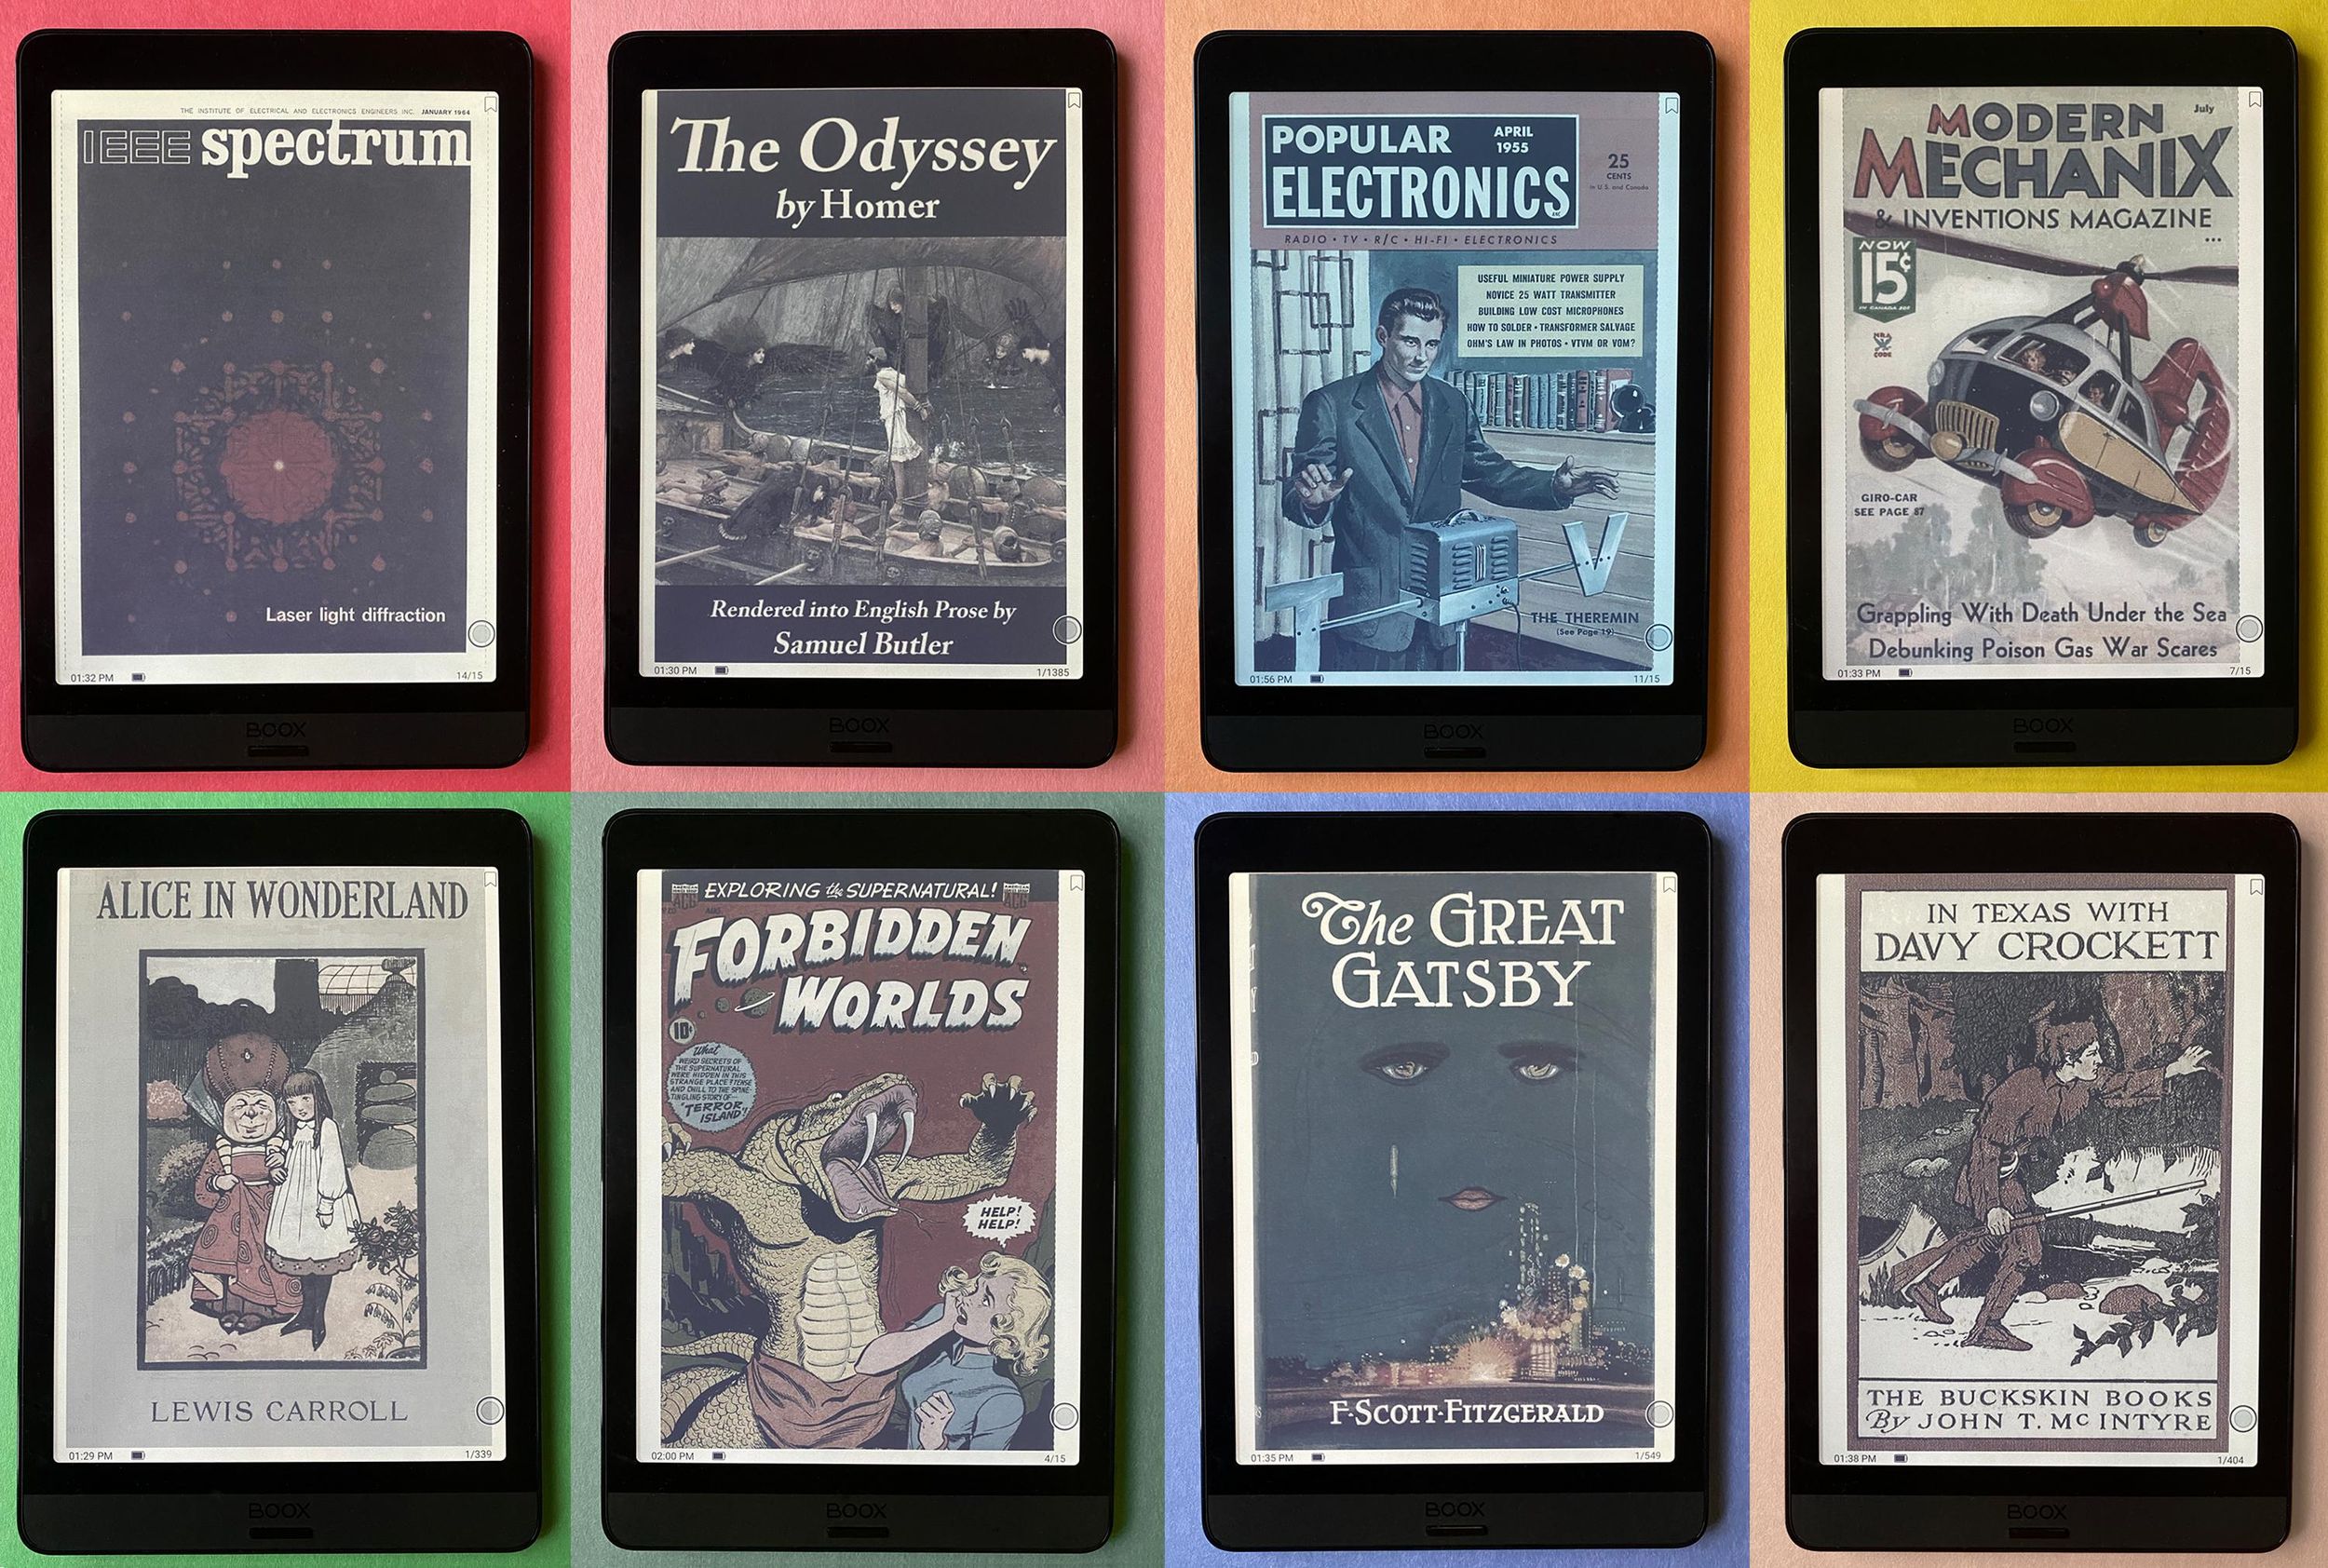 Collection of 8 photographs of book and magazine covers on a color E Ink reader, sitting on differently colored paper backgrounds.